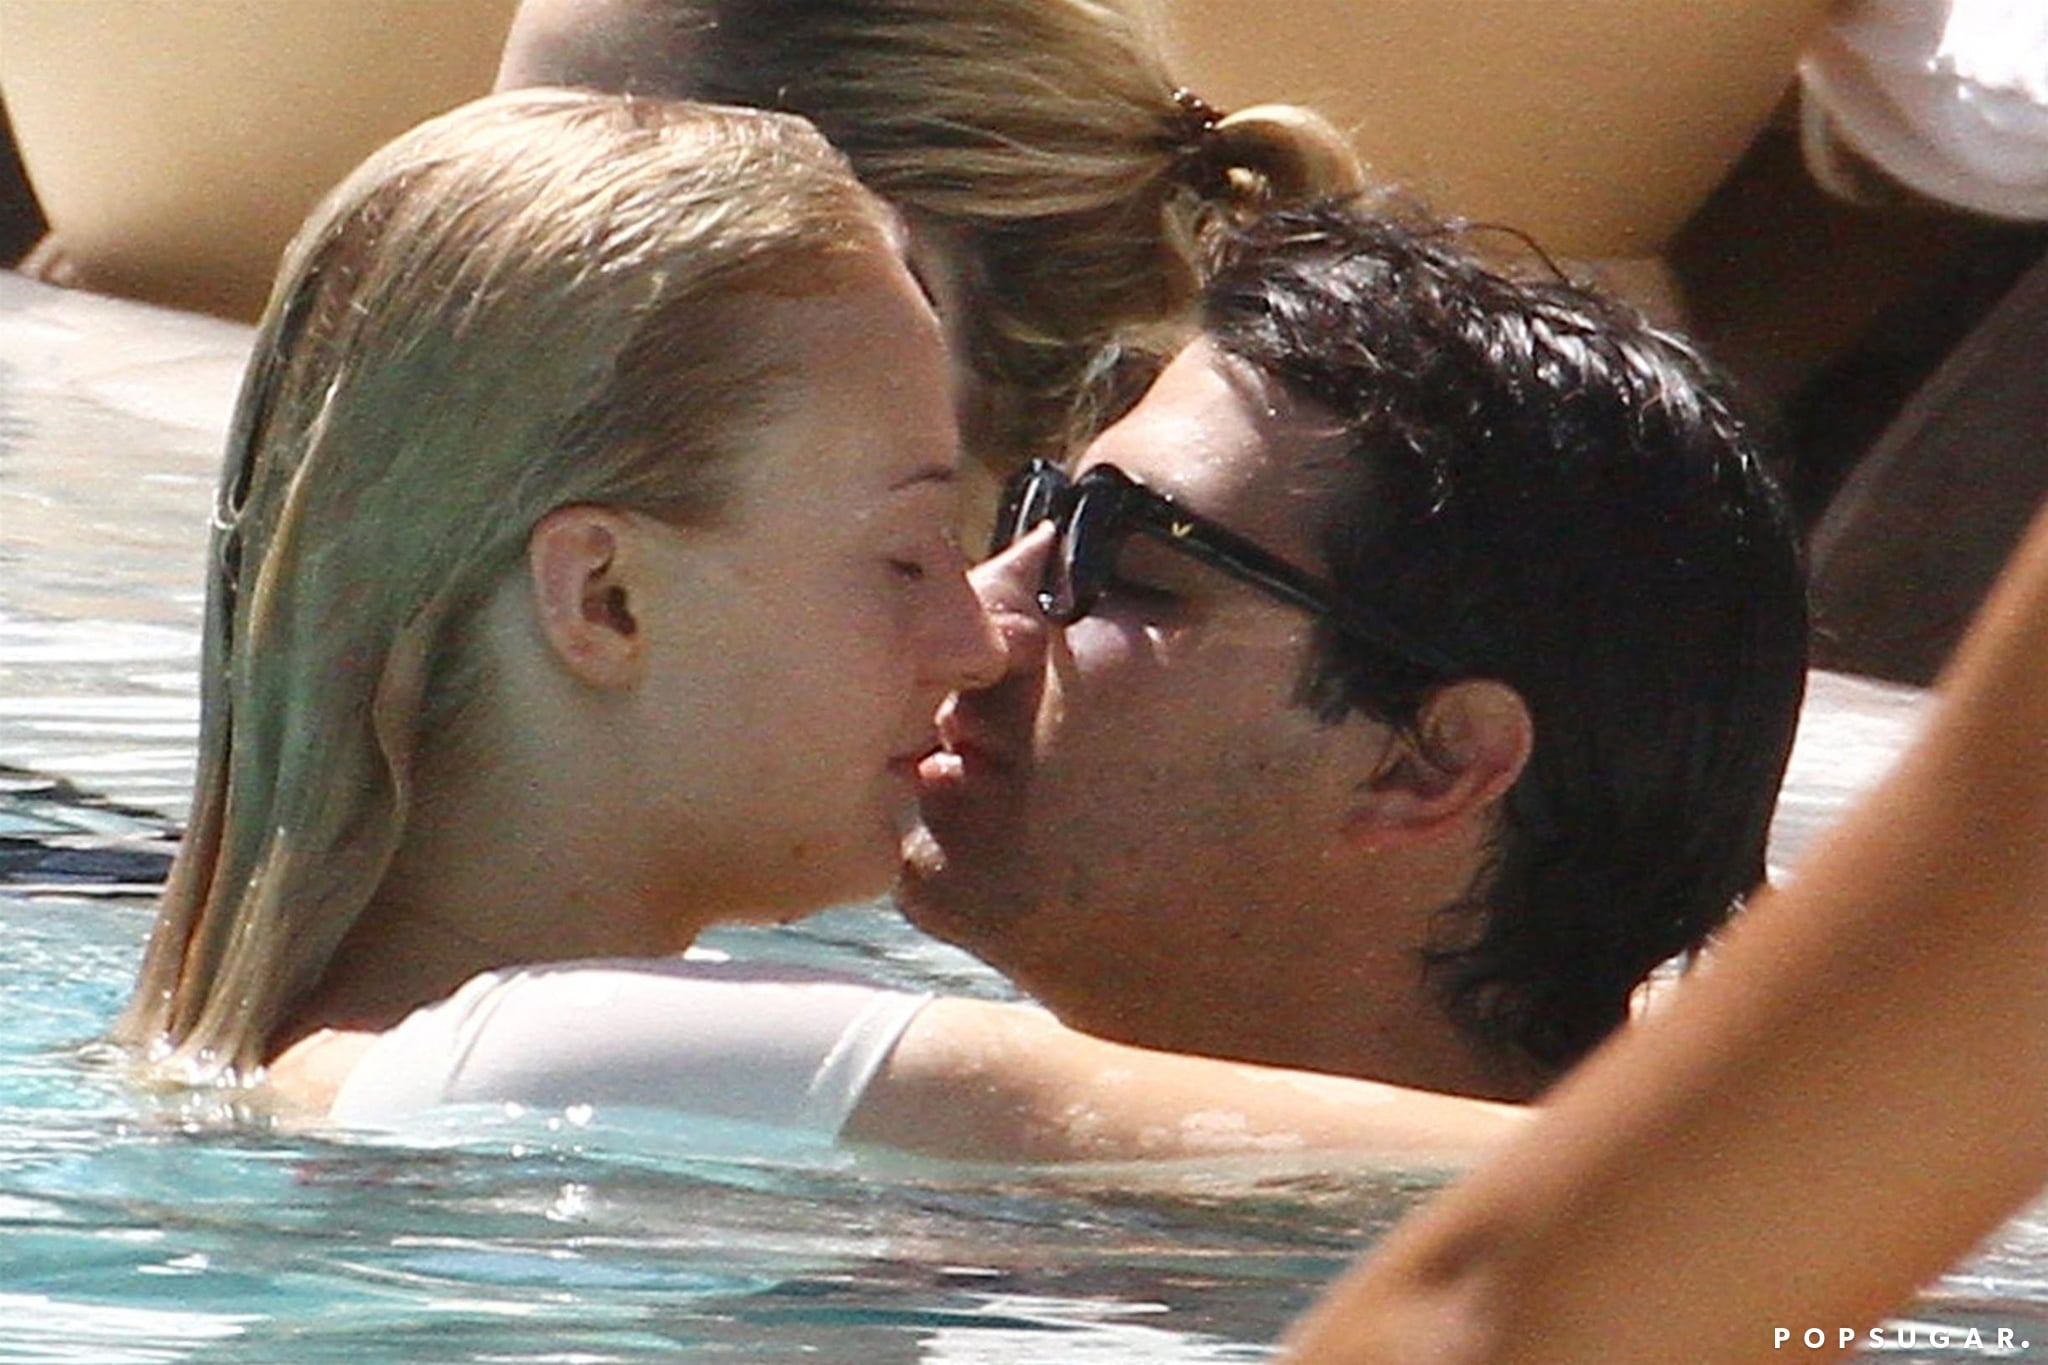 Sophie Turner Spotted Sharing A Kiss With Multi-Millionaire